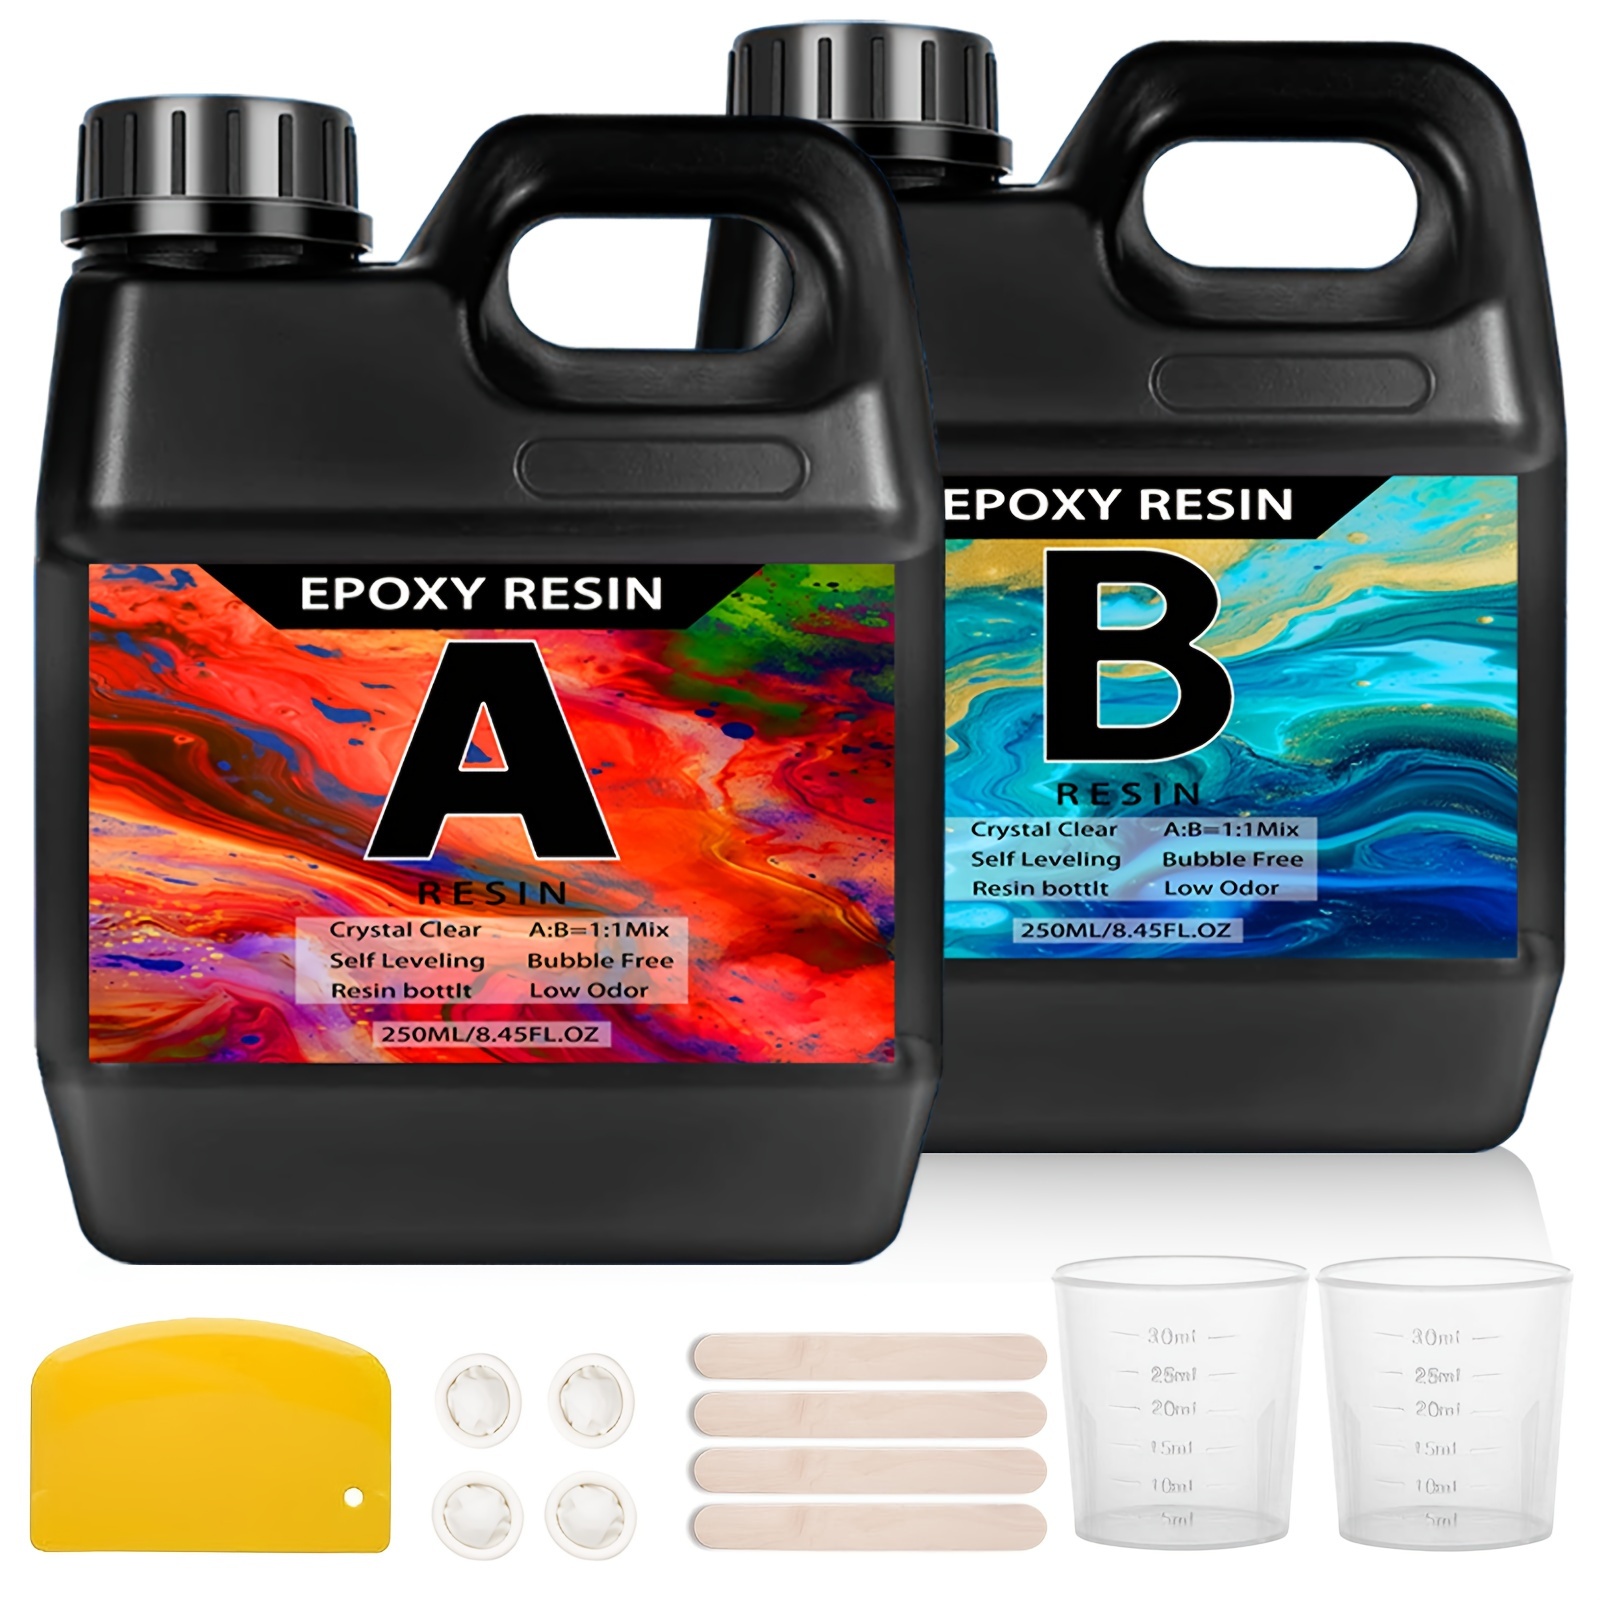 

Epoxy Resin Kit - 4 Hour Demold, Bubble-free Crystal Clear For Diy Crafts & Art Projects